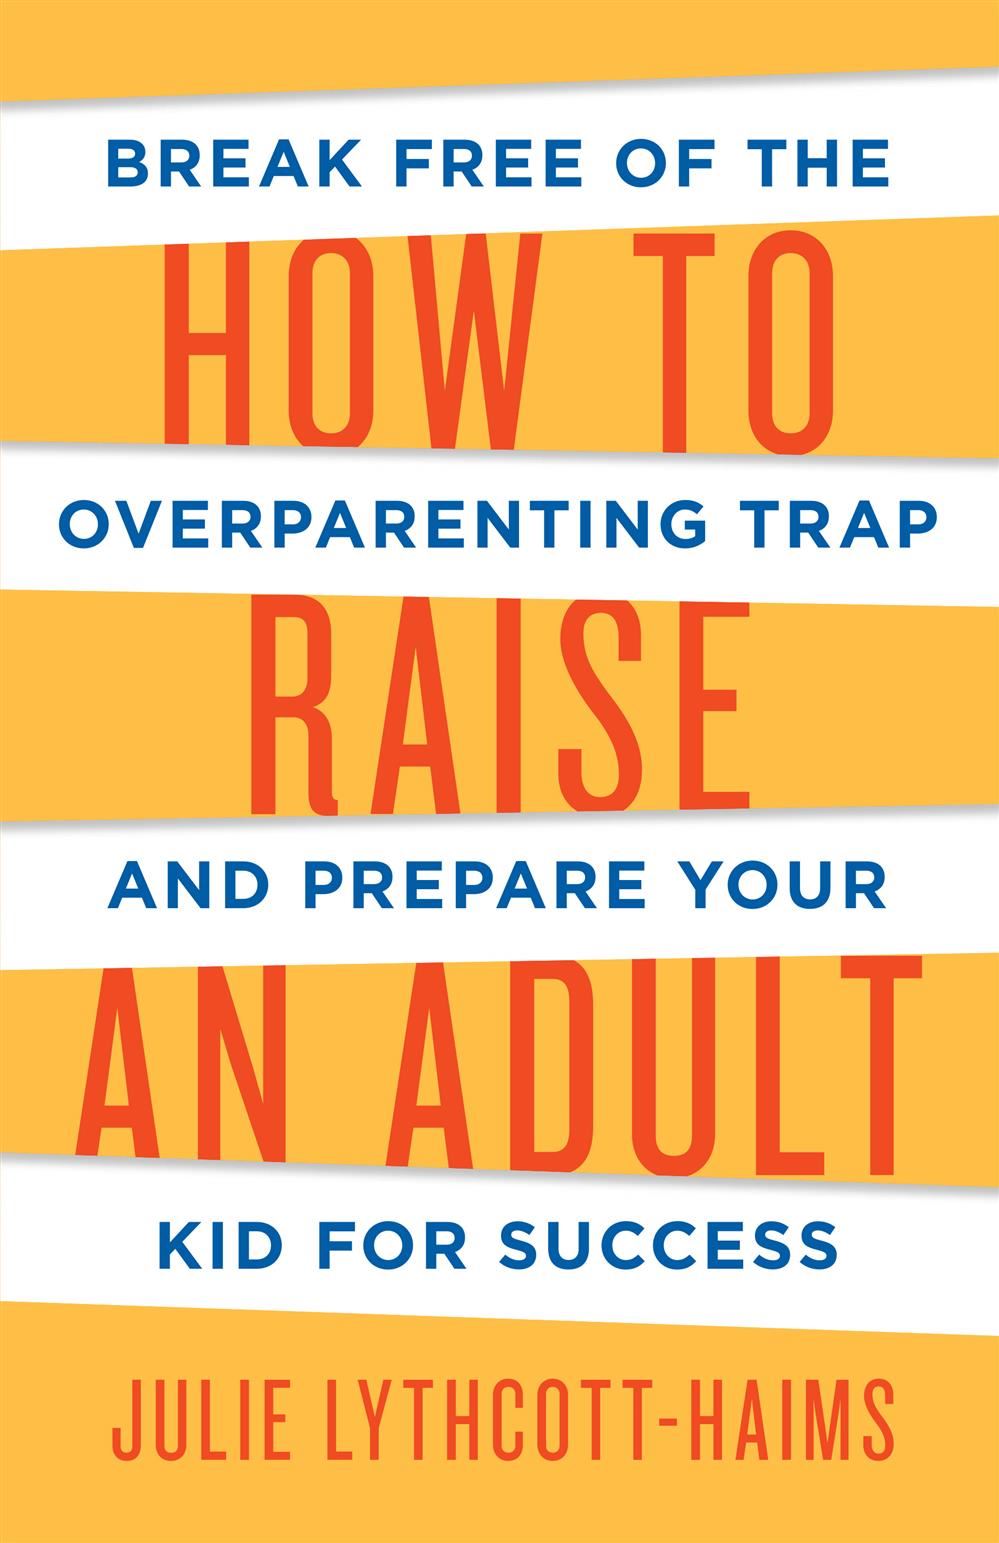  How to Raise An Adult bookcover